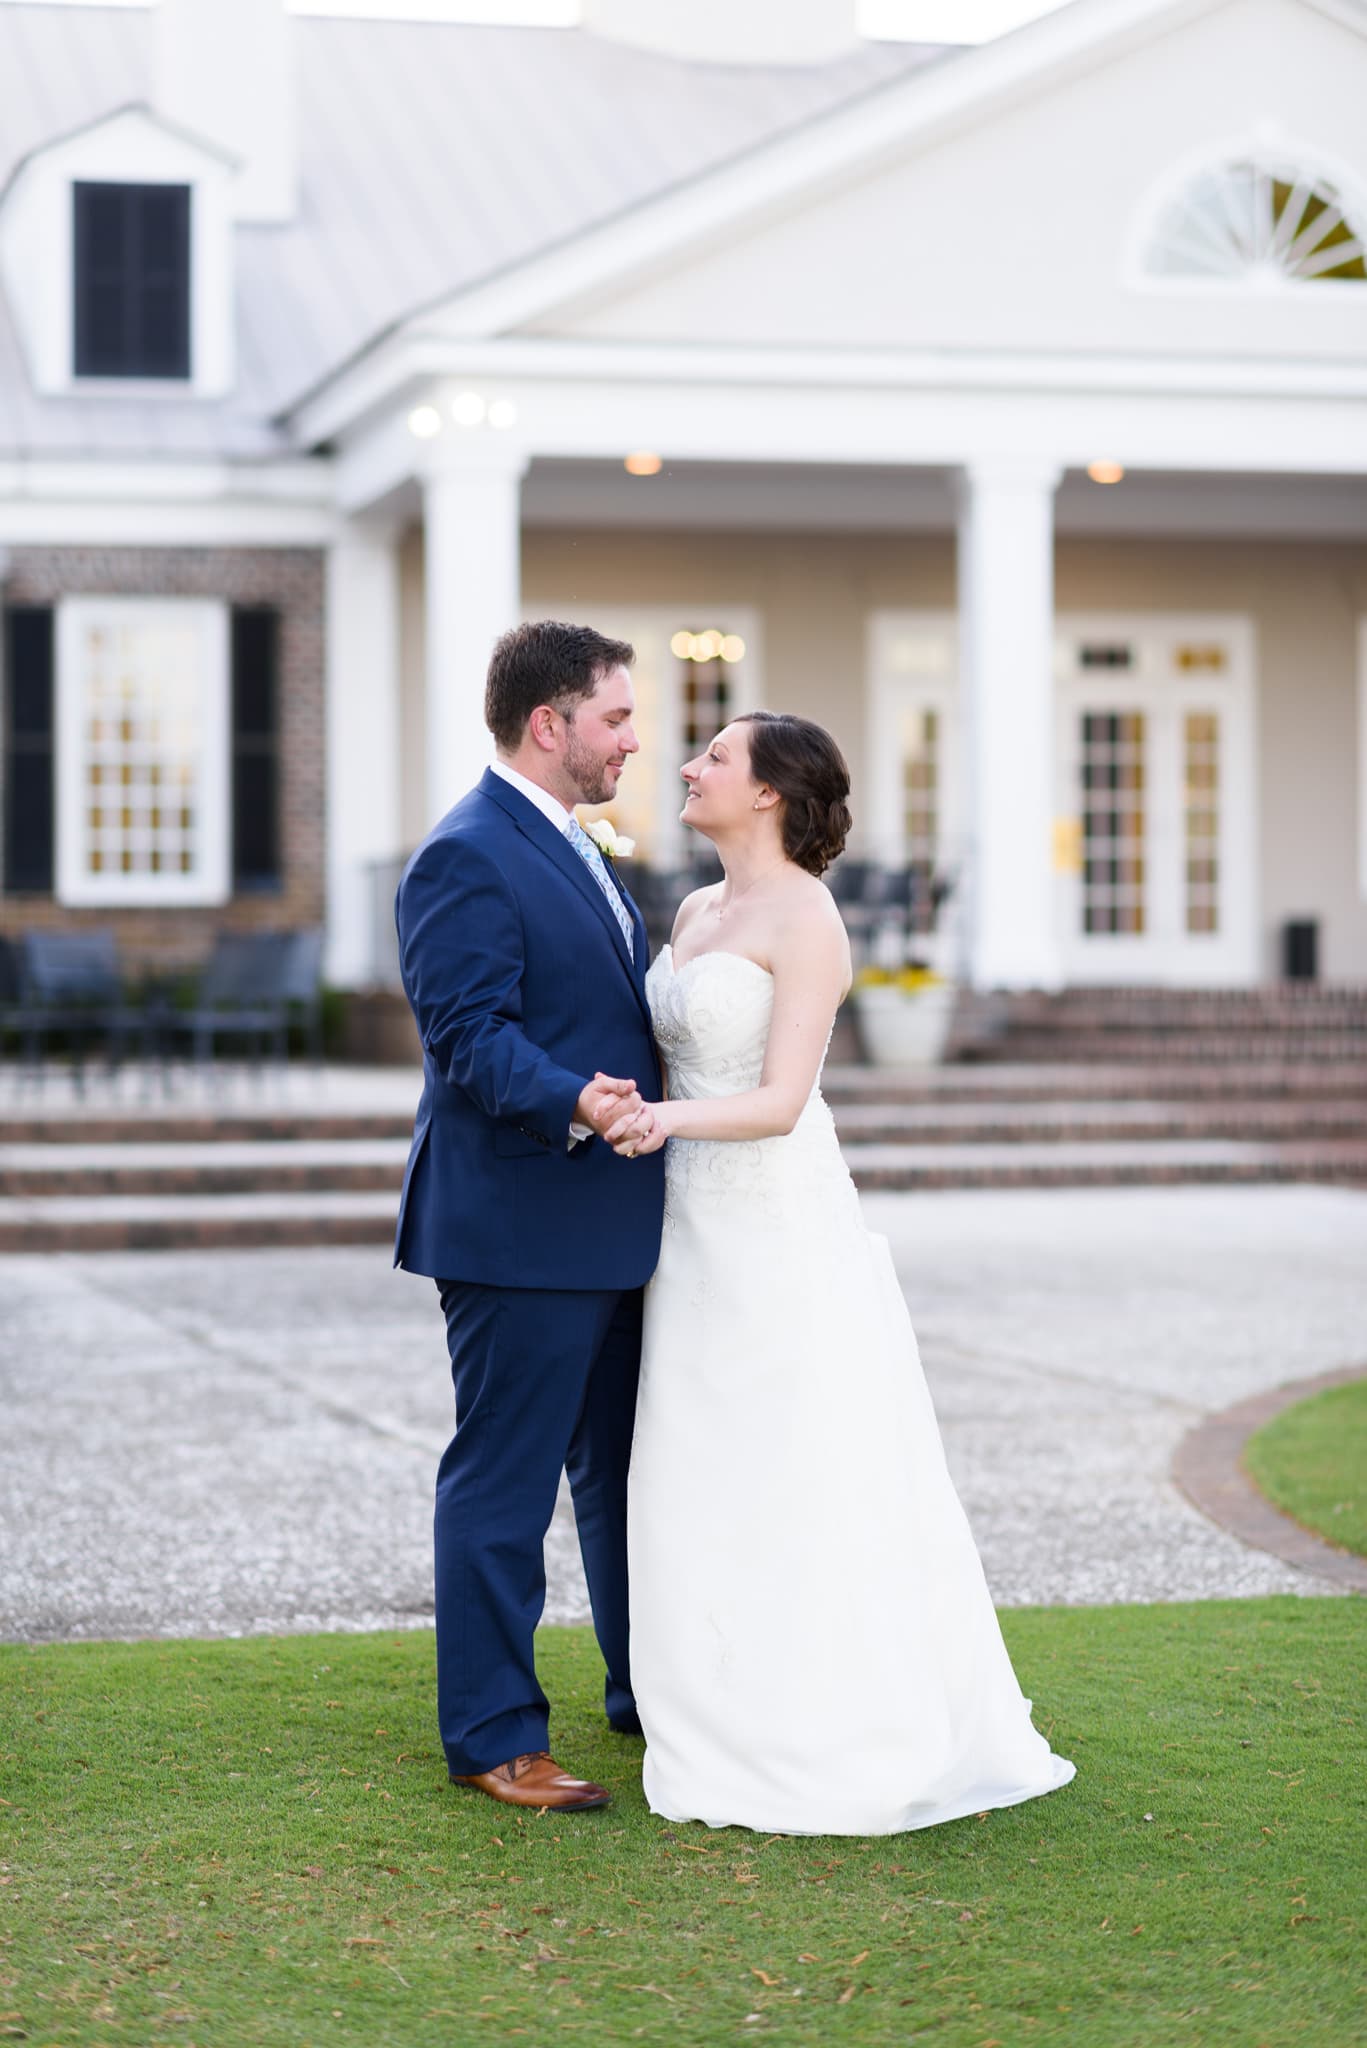 Portraits of the bride and groom on the golf course at sunset - Pawleys Plantation